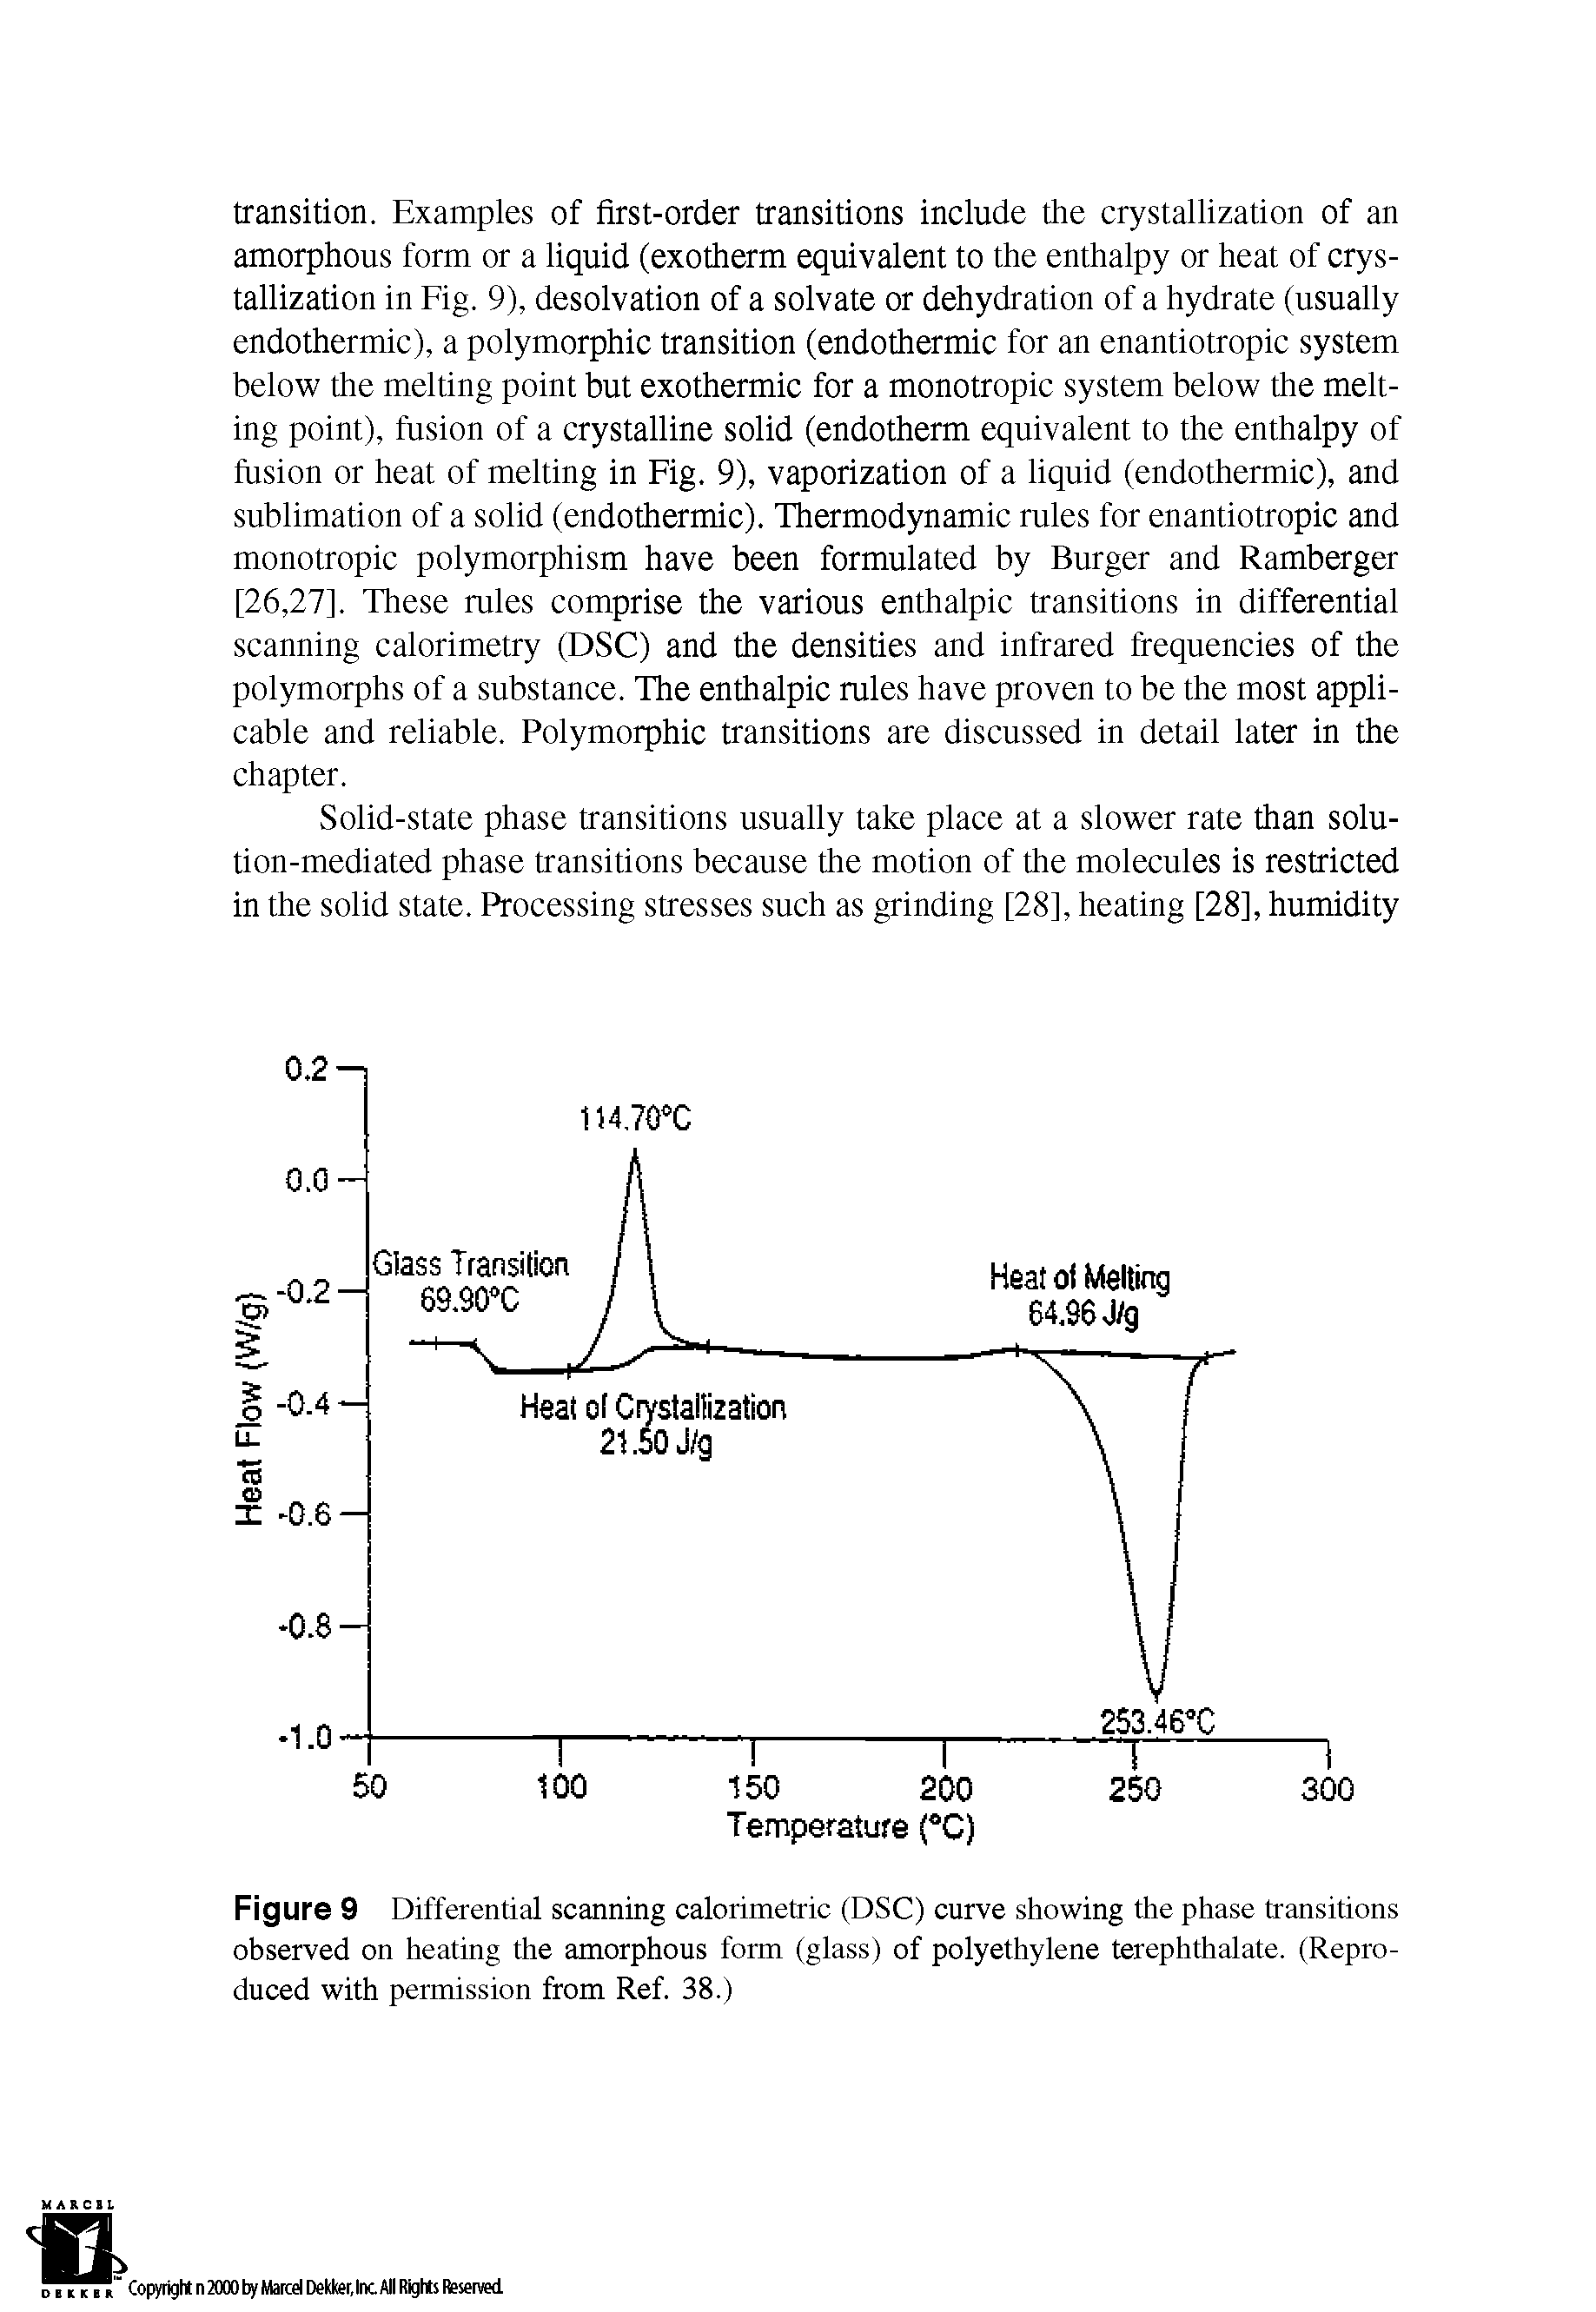 Figure 9 Differential scanning calorimetric (DSC) curve showing the phase transitions observed on heating the amorphous form (glass) of polyethylene terephthalate. (Reproduced with permission from Ref. 38.)...